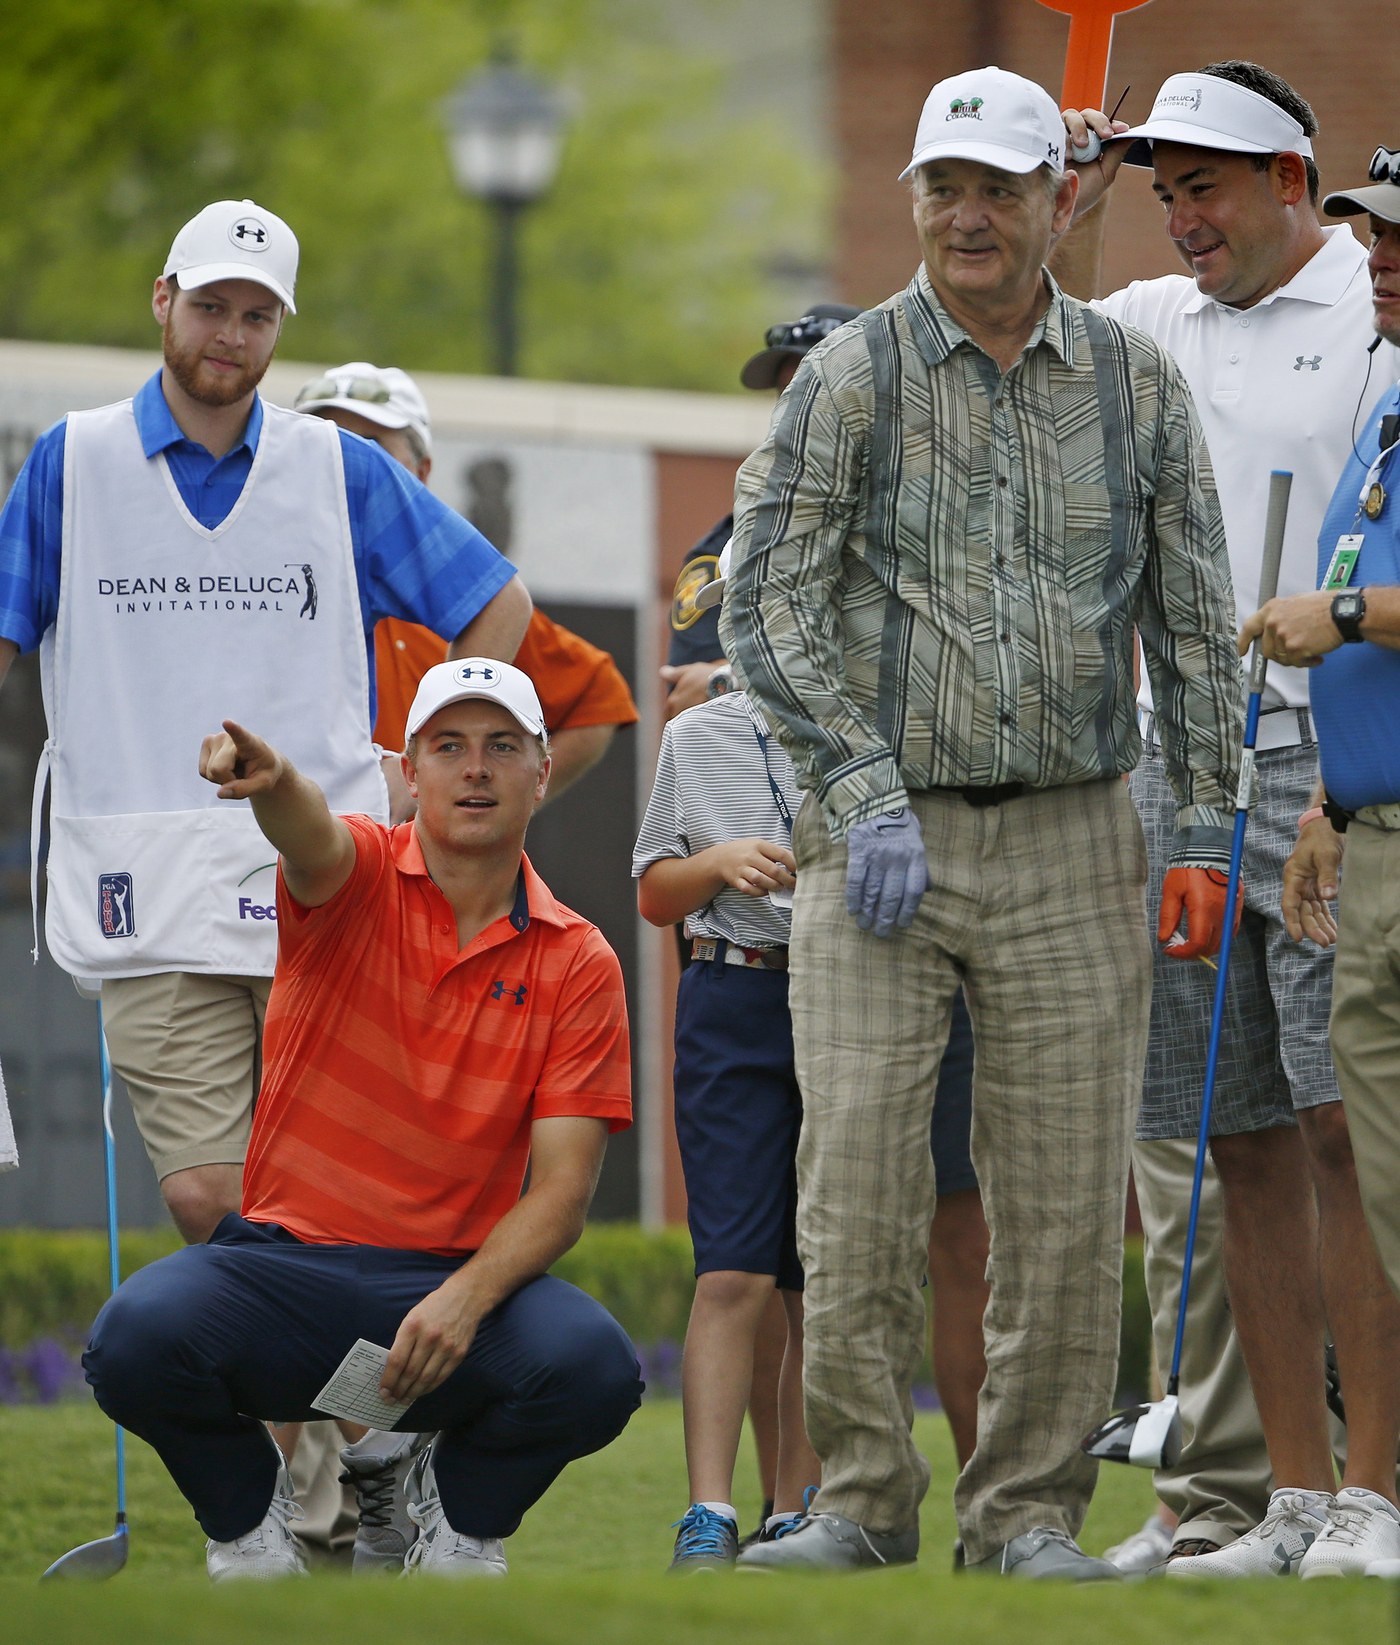 VIDEO Bill Murray and Jordan Spieth tee off at the PGA TOUR Colonial